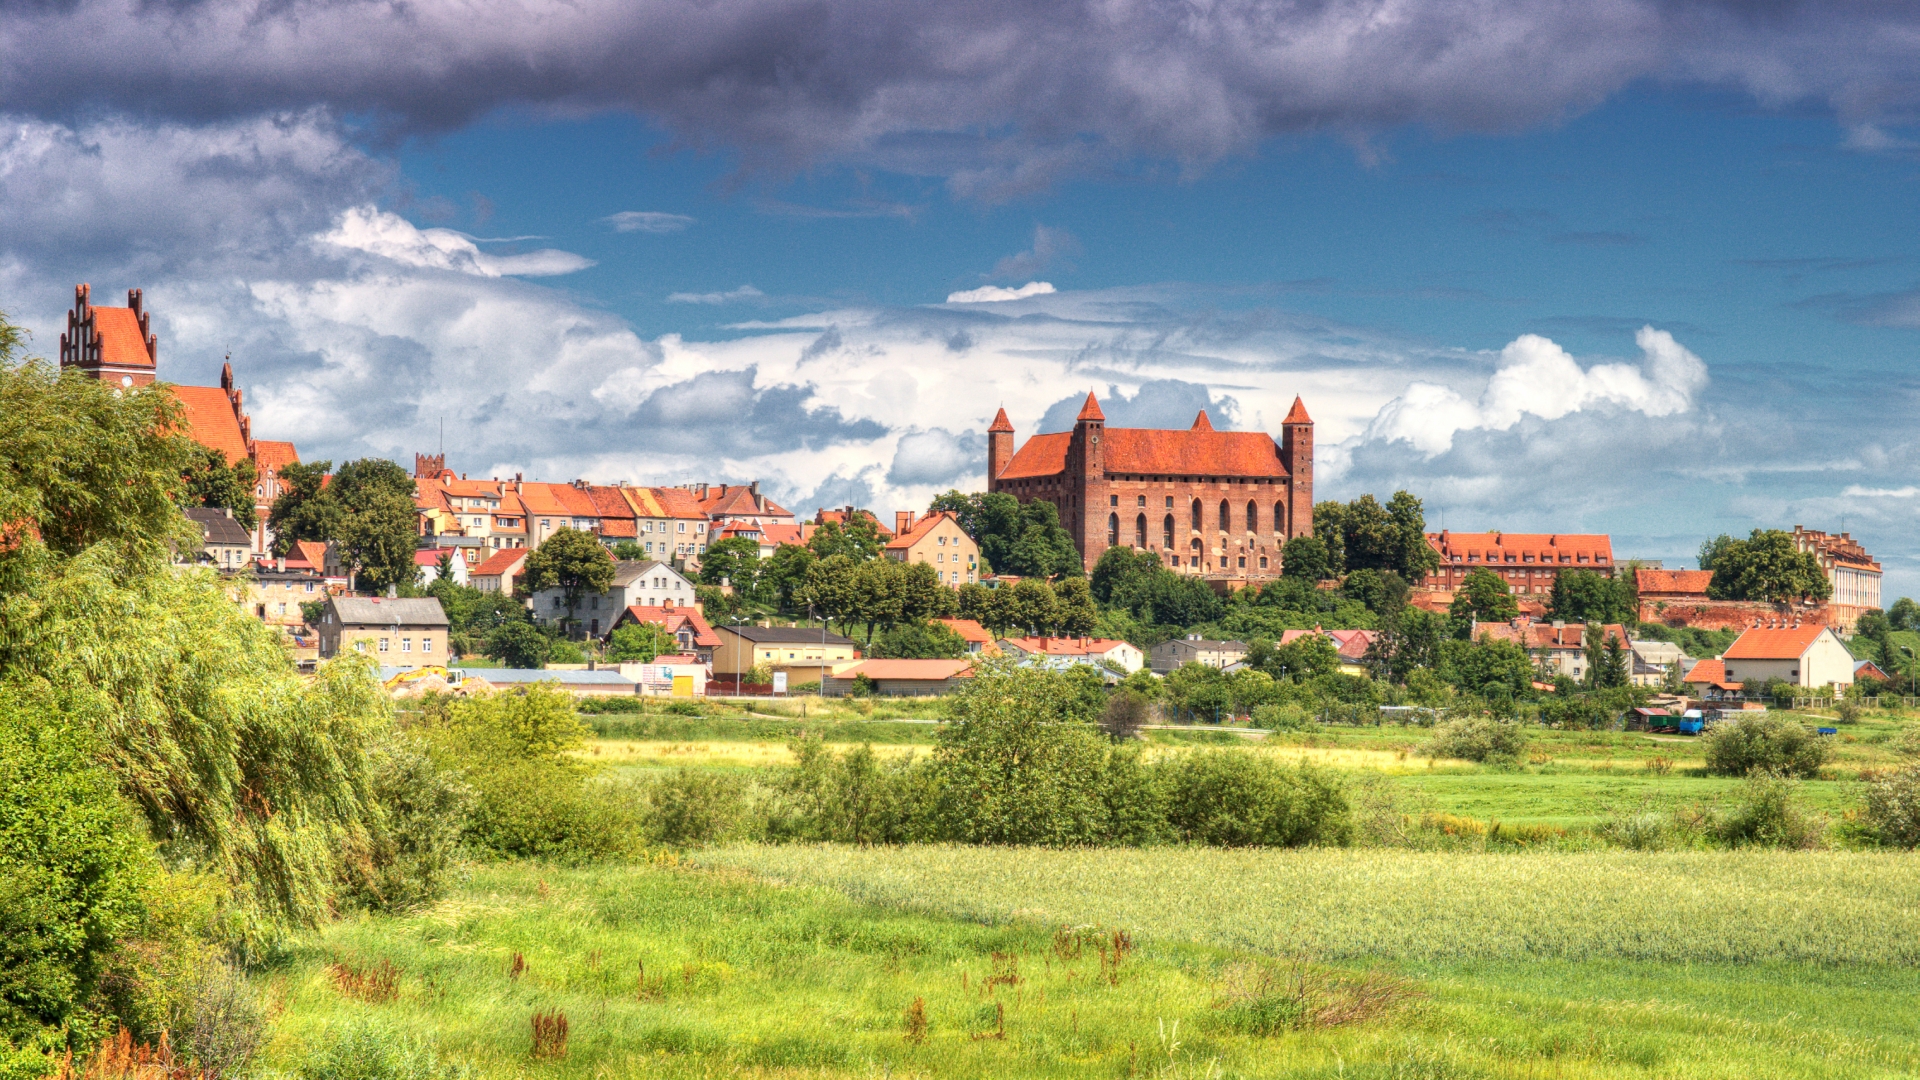 Man Made Gniew Castle 1920x1080